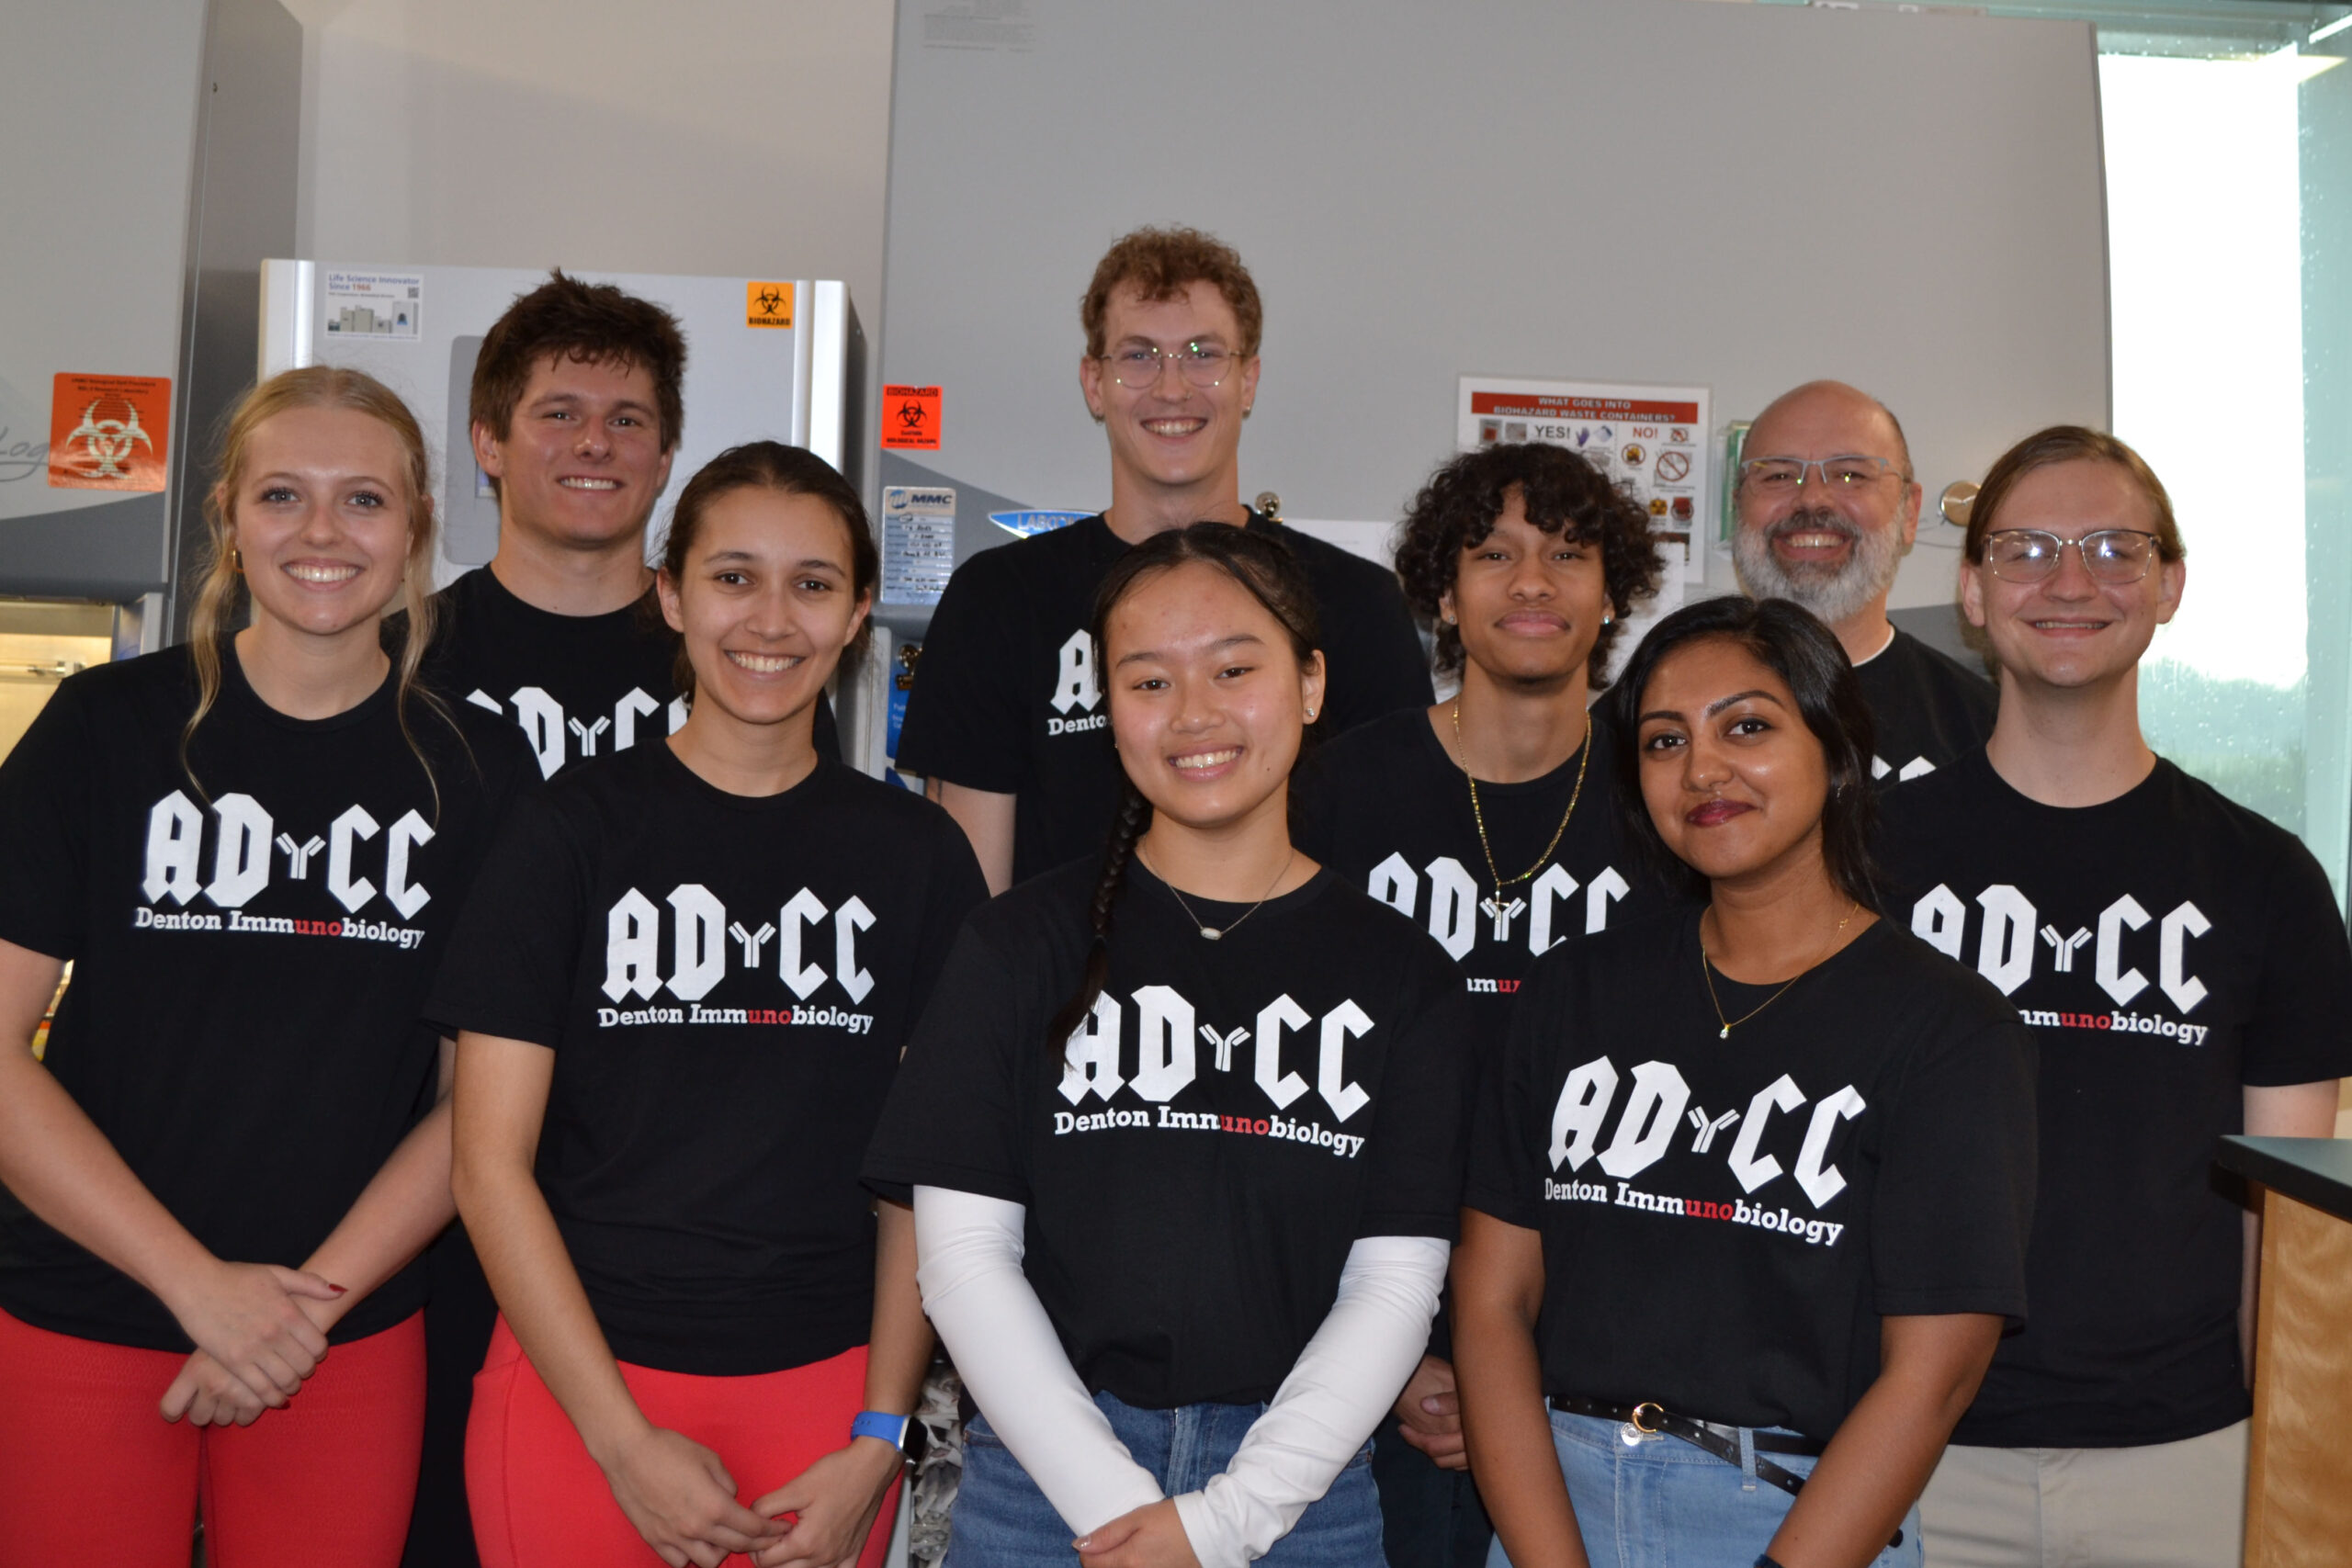 Members of the Denton Lab include&colon; &lpar;back row&rpar; Nathan Booher&comma; Donald &lpar;DJ&rpar; Rogers&comma; Victor Rivero&comma; Paul W&period; Denton and Jaden Nienhueser&period; Front row&colon; Cami Bisson&comma; Isabelle Weber&comma; Angela Truong and Diya Joy Varughese&period;